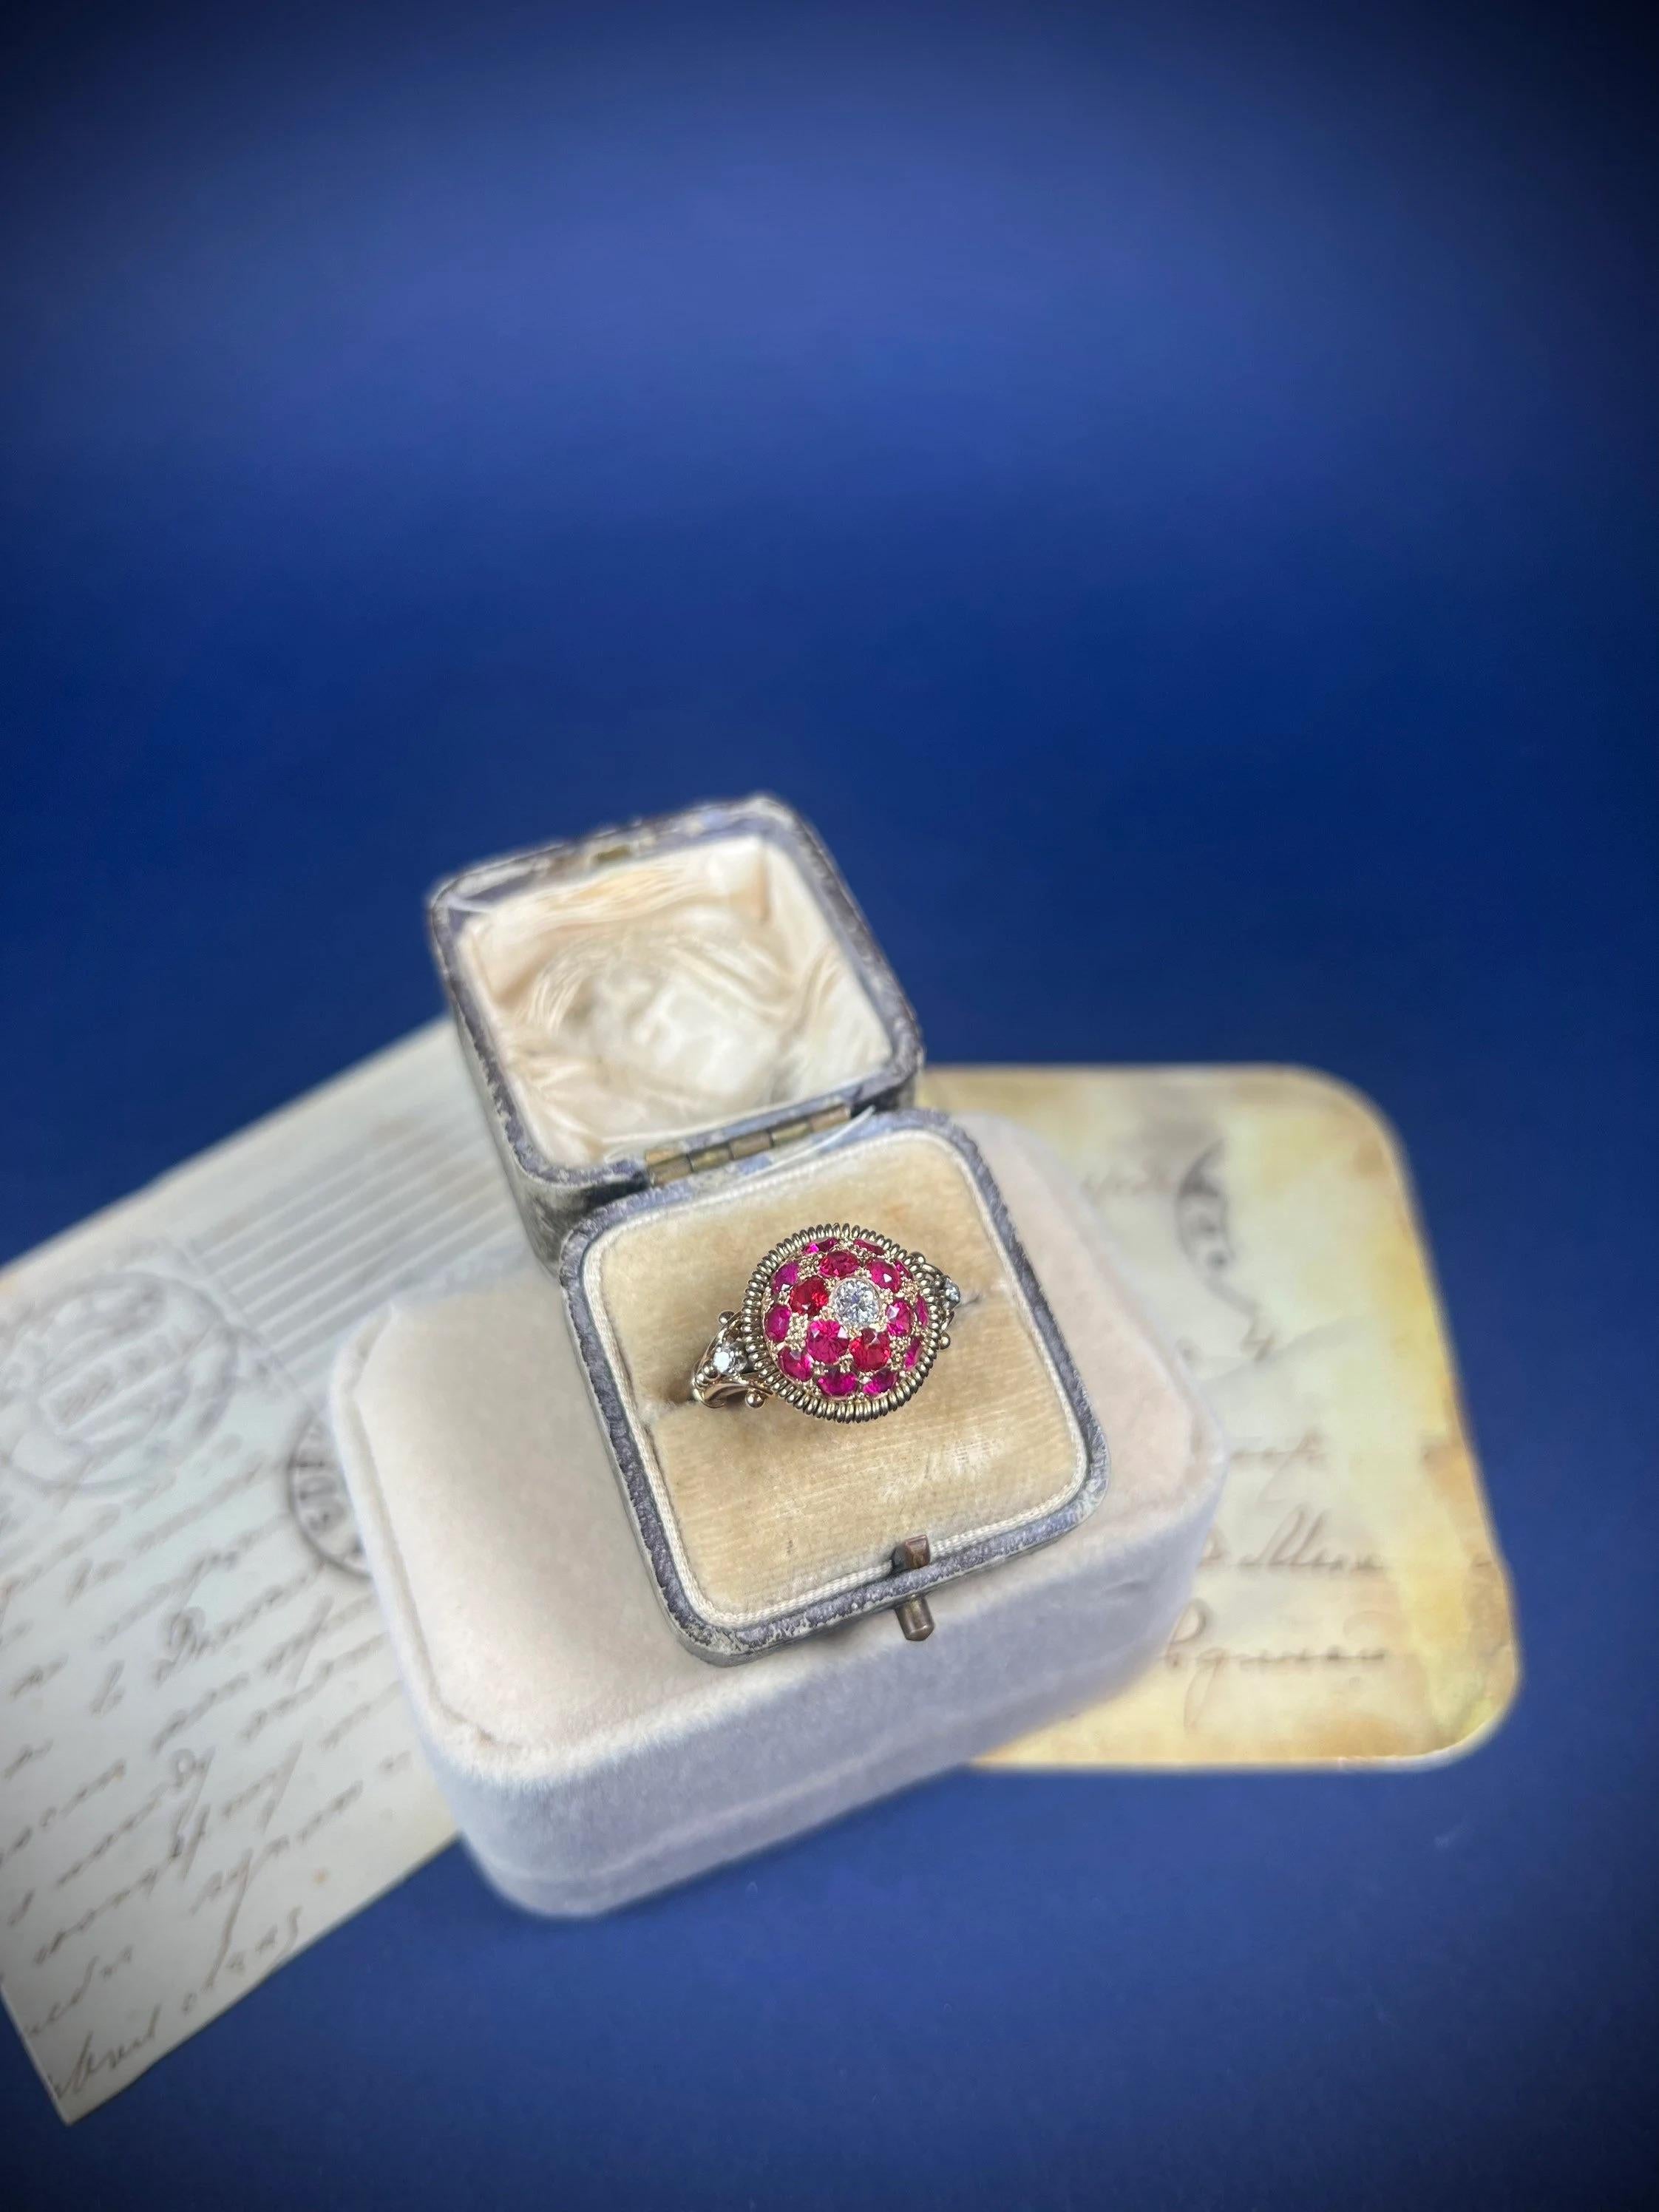 Vintage Bombe Ring 

18ct Gold Stamped

Circa 1940’s

Fabulous, vintage Bombe shaped ring. Set with natural rubies & brilliant cut diamonds. Mounted on a yellow gold, split band. 
The ring is in excellent condition & the detailing is just gorgeous!